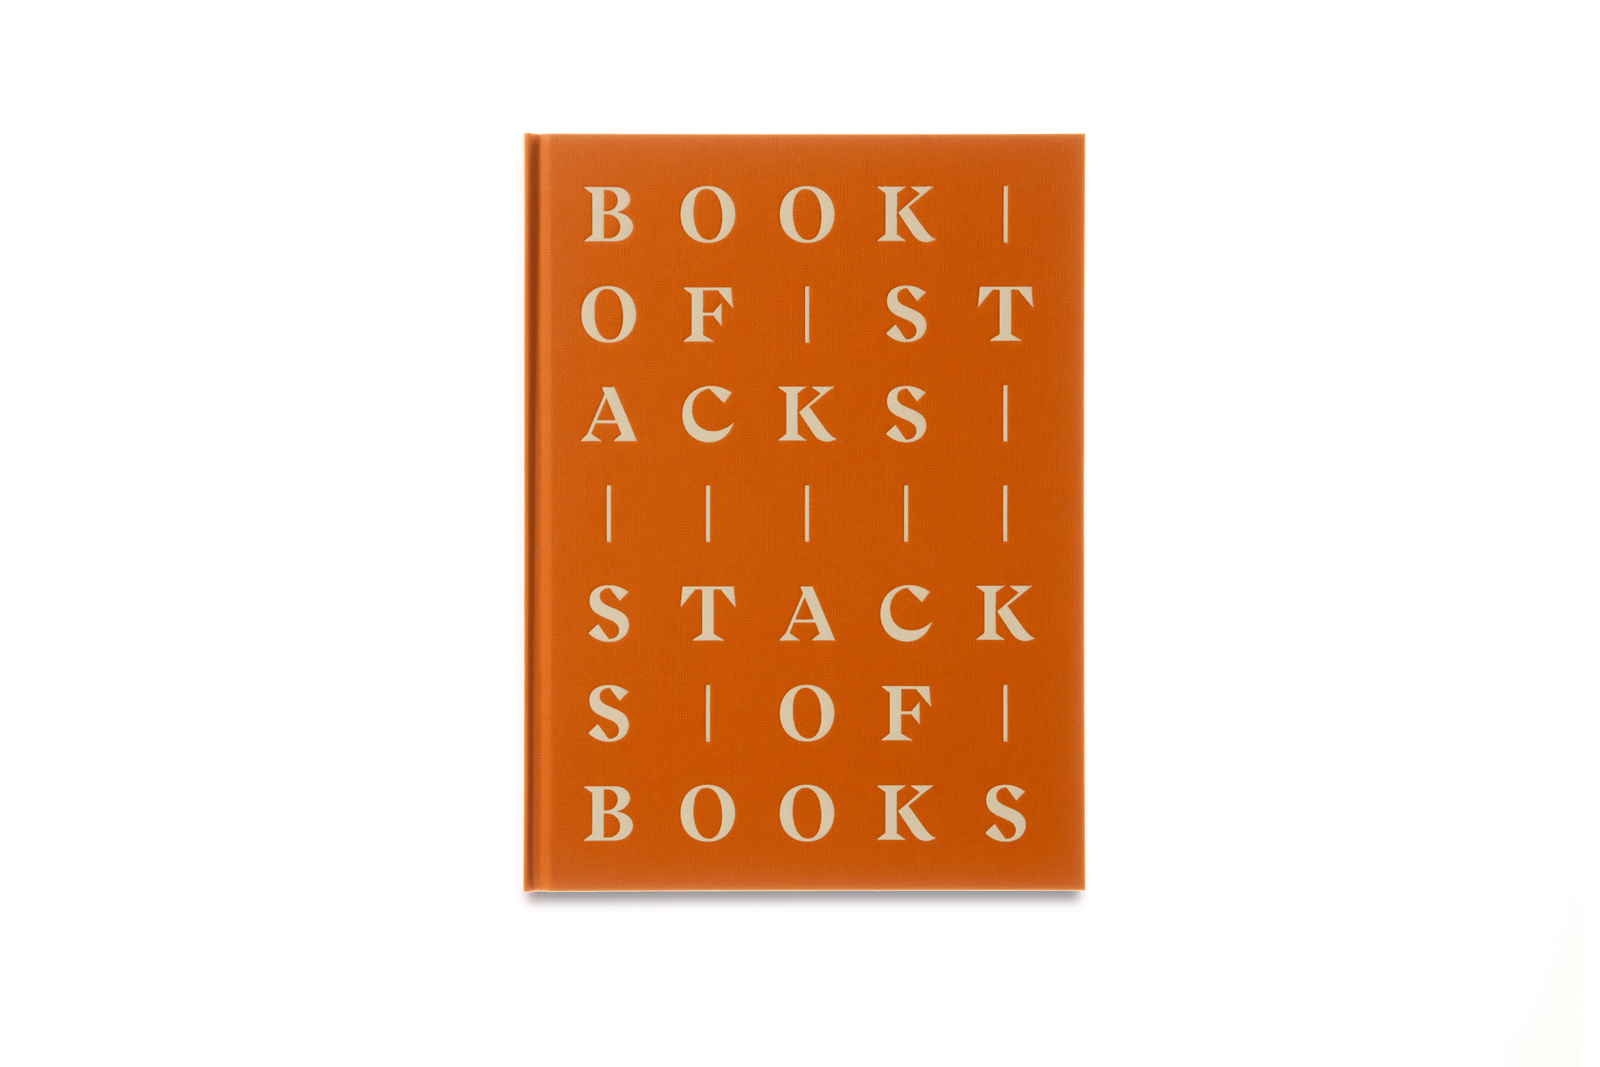 Book of stacks, Stacks of books - Première édition